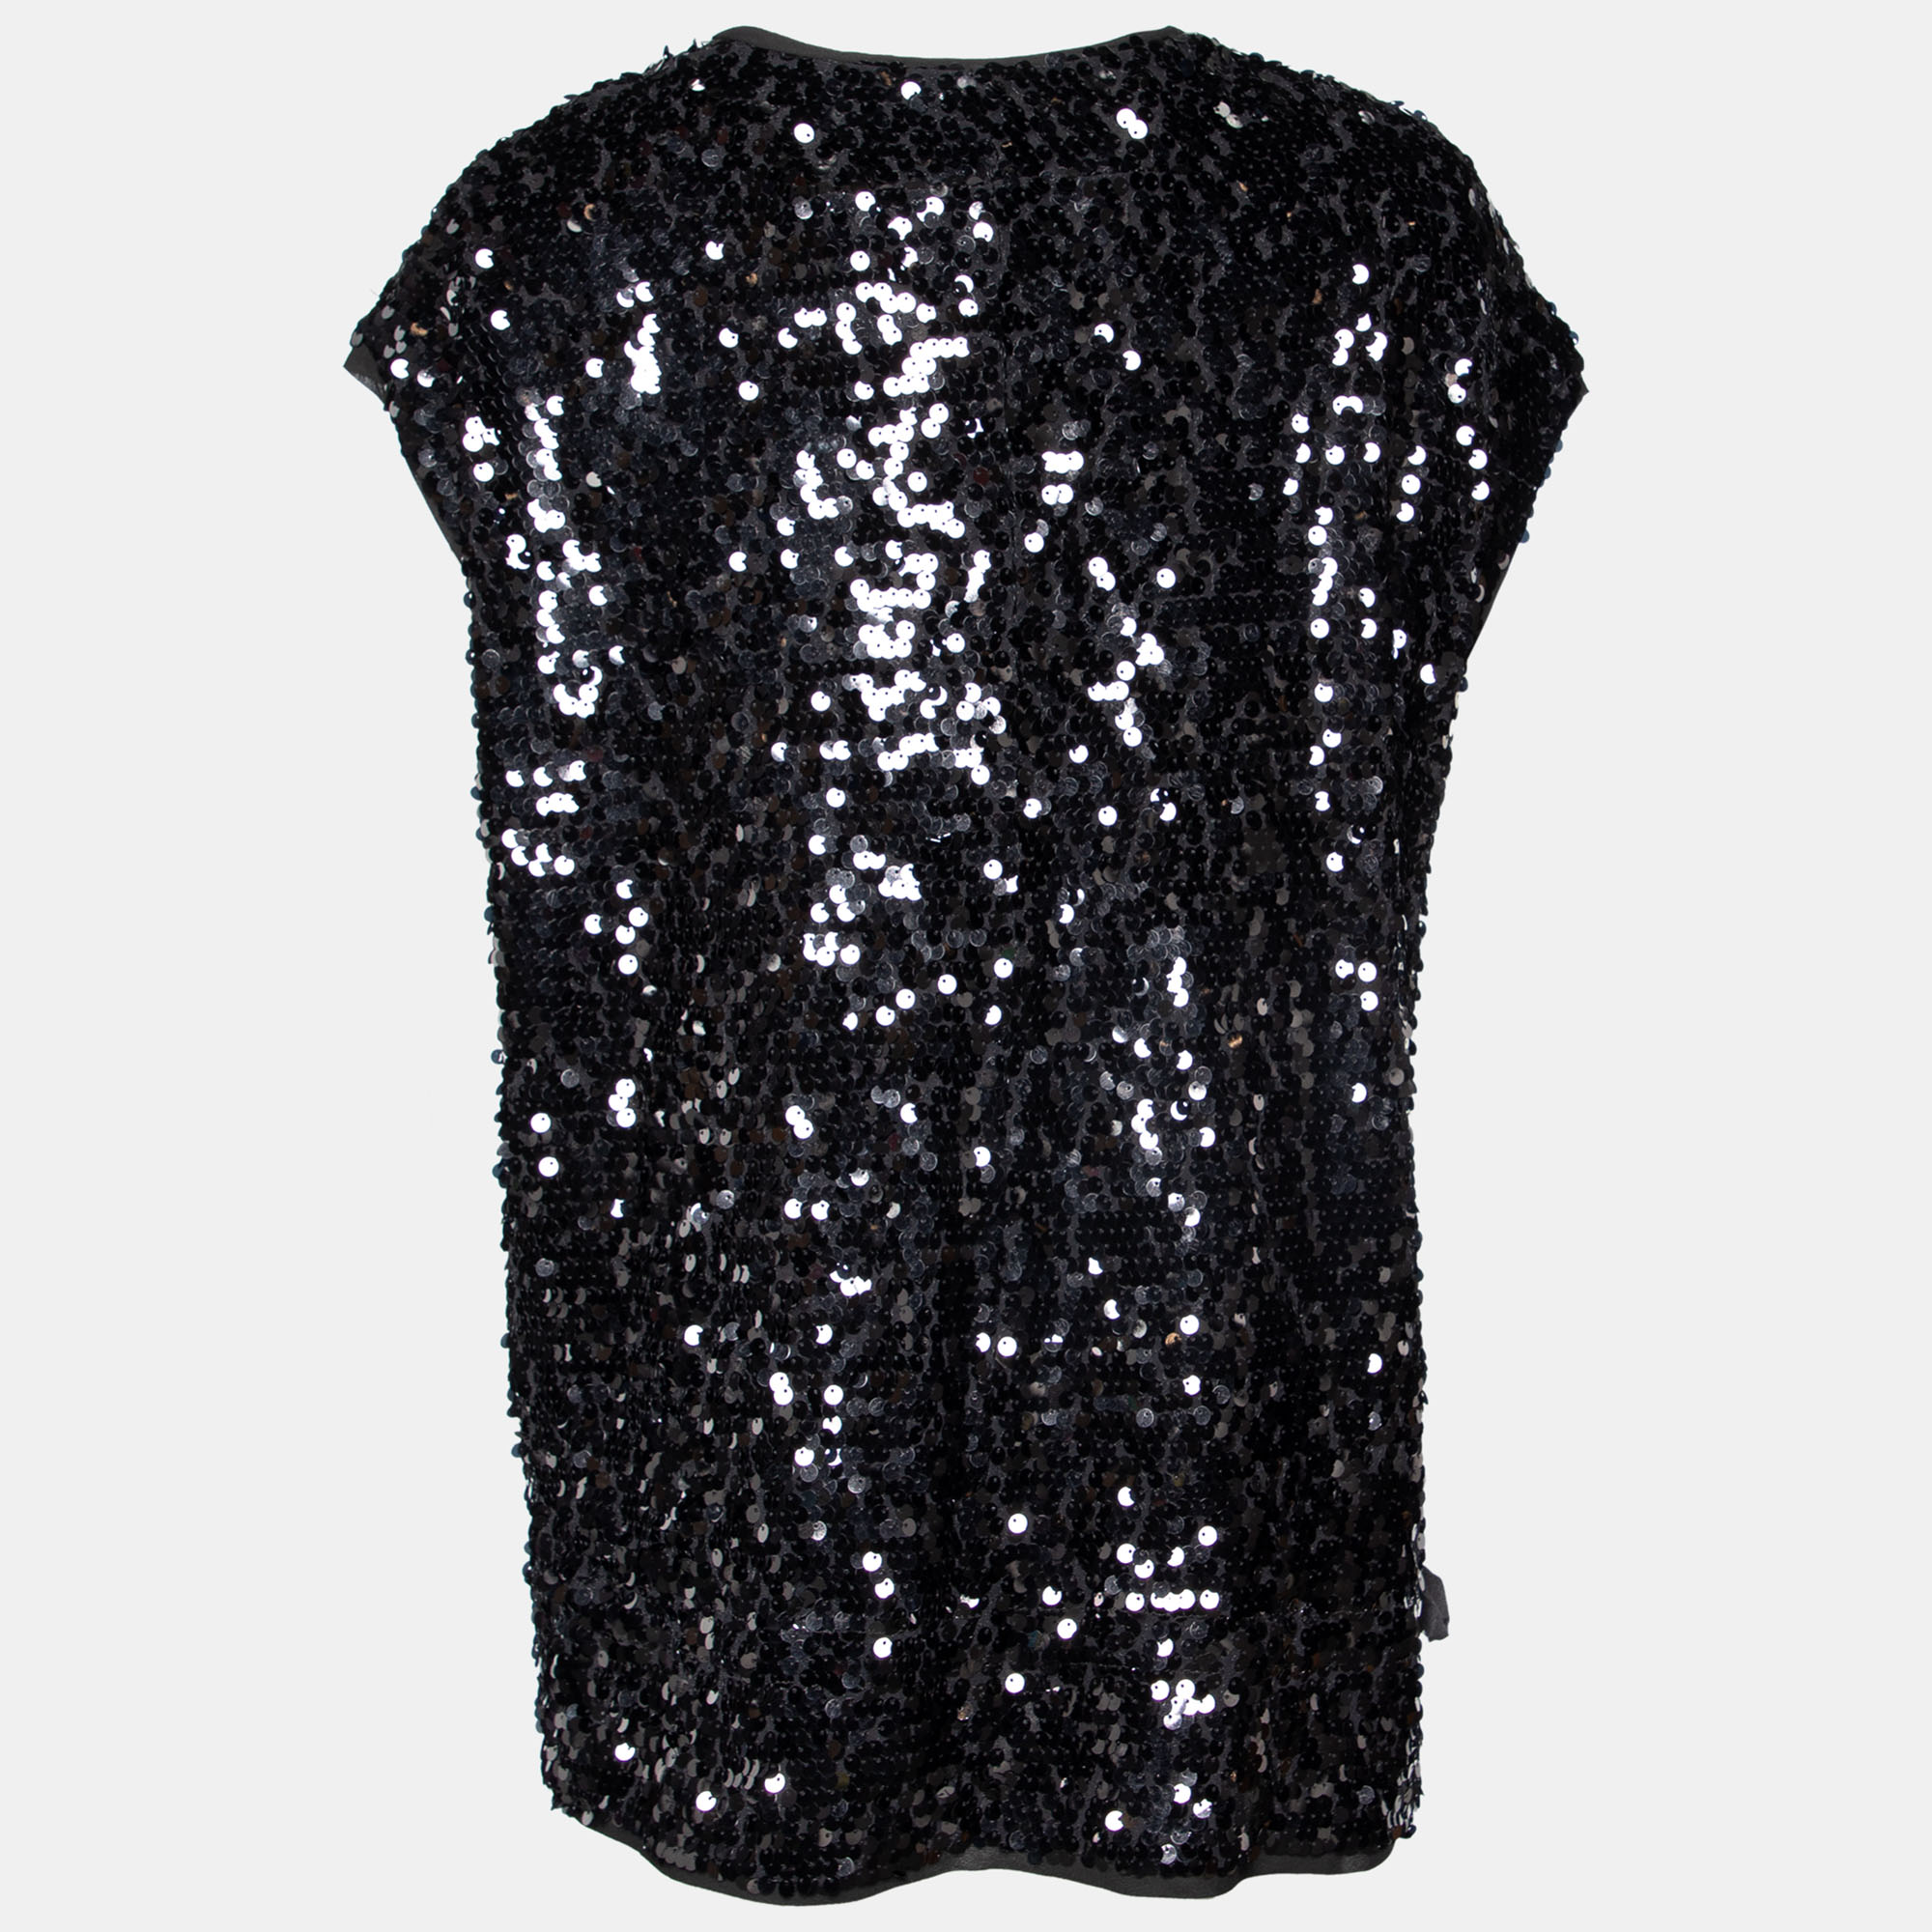 

Givenchy Black Sequin Embellished Chiffon Top